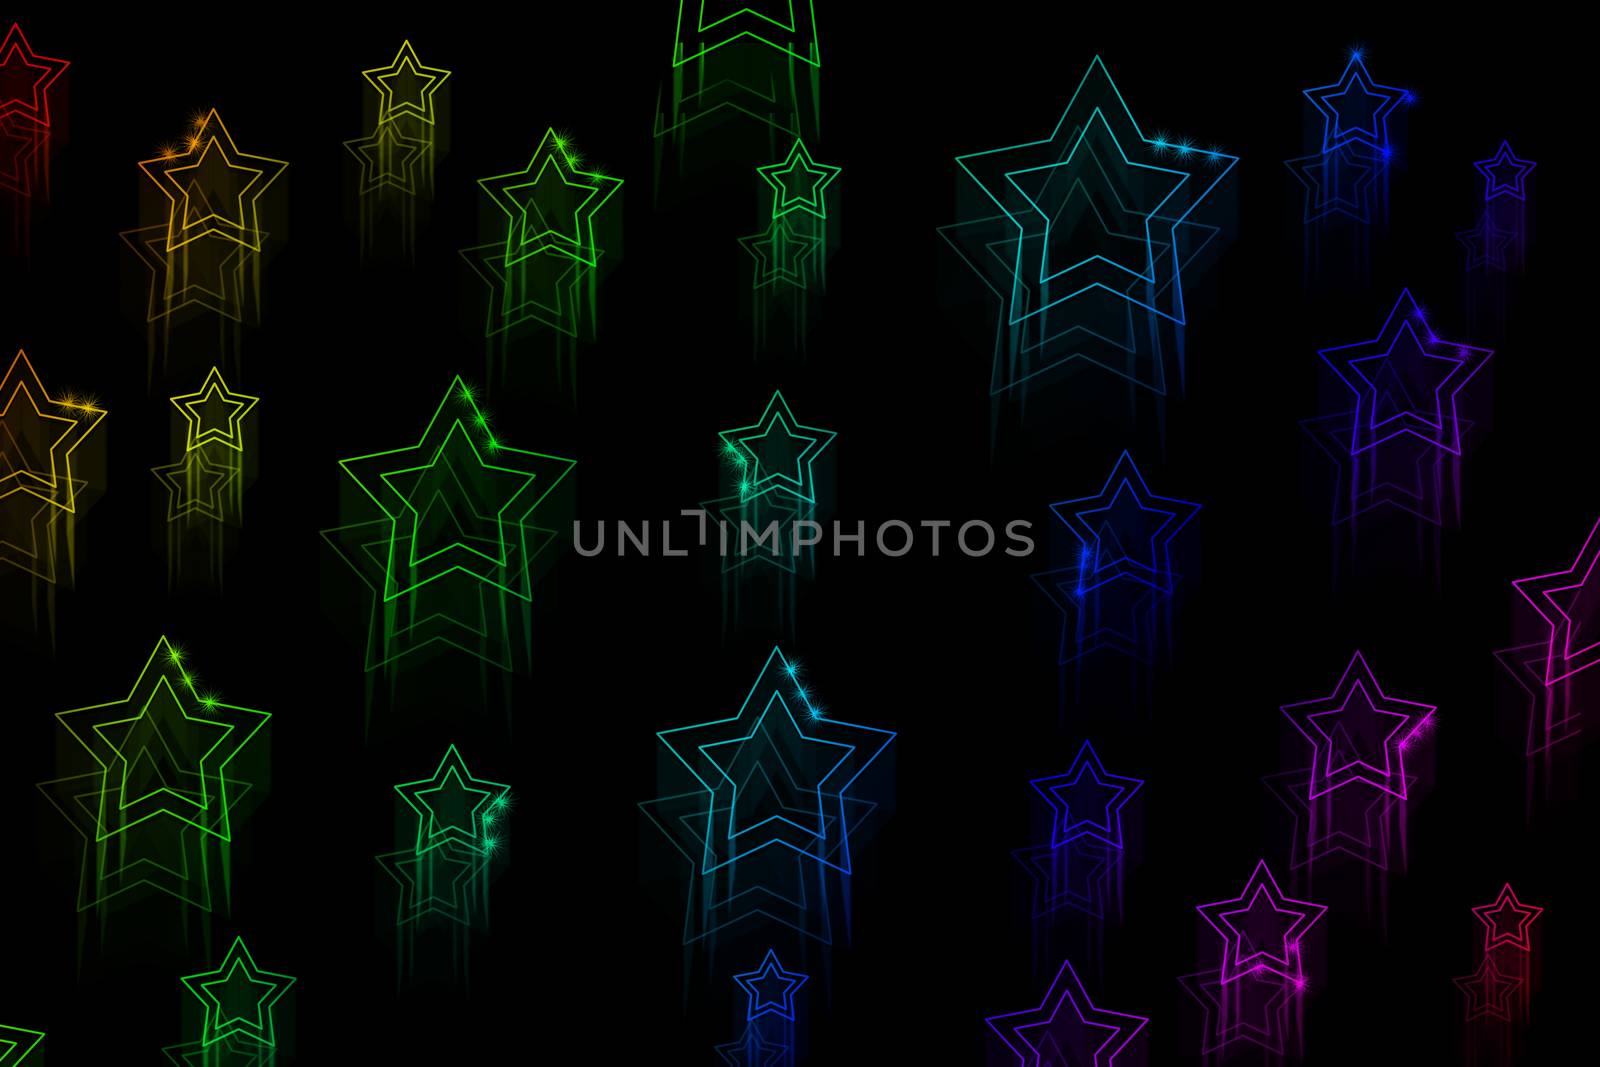 Lots of neon stars on a black background